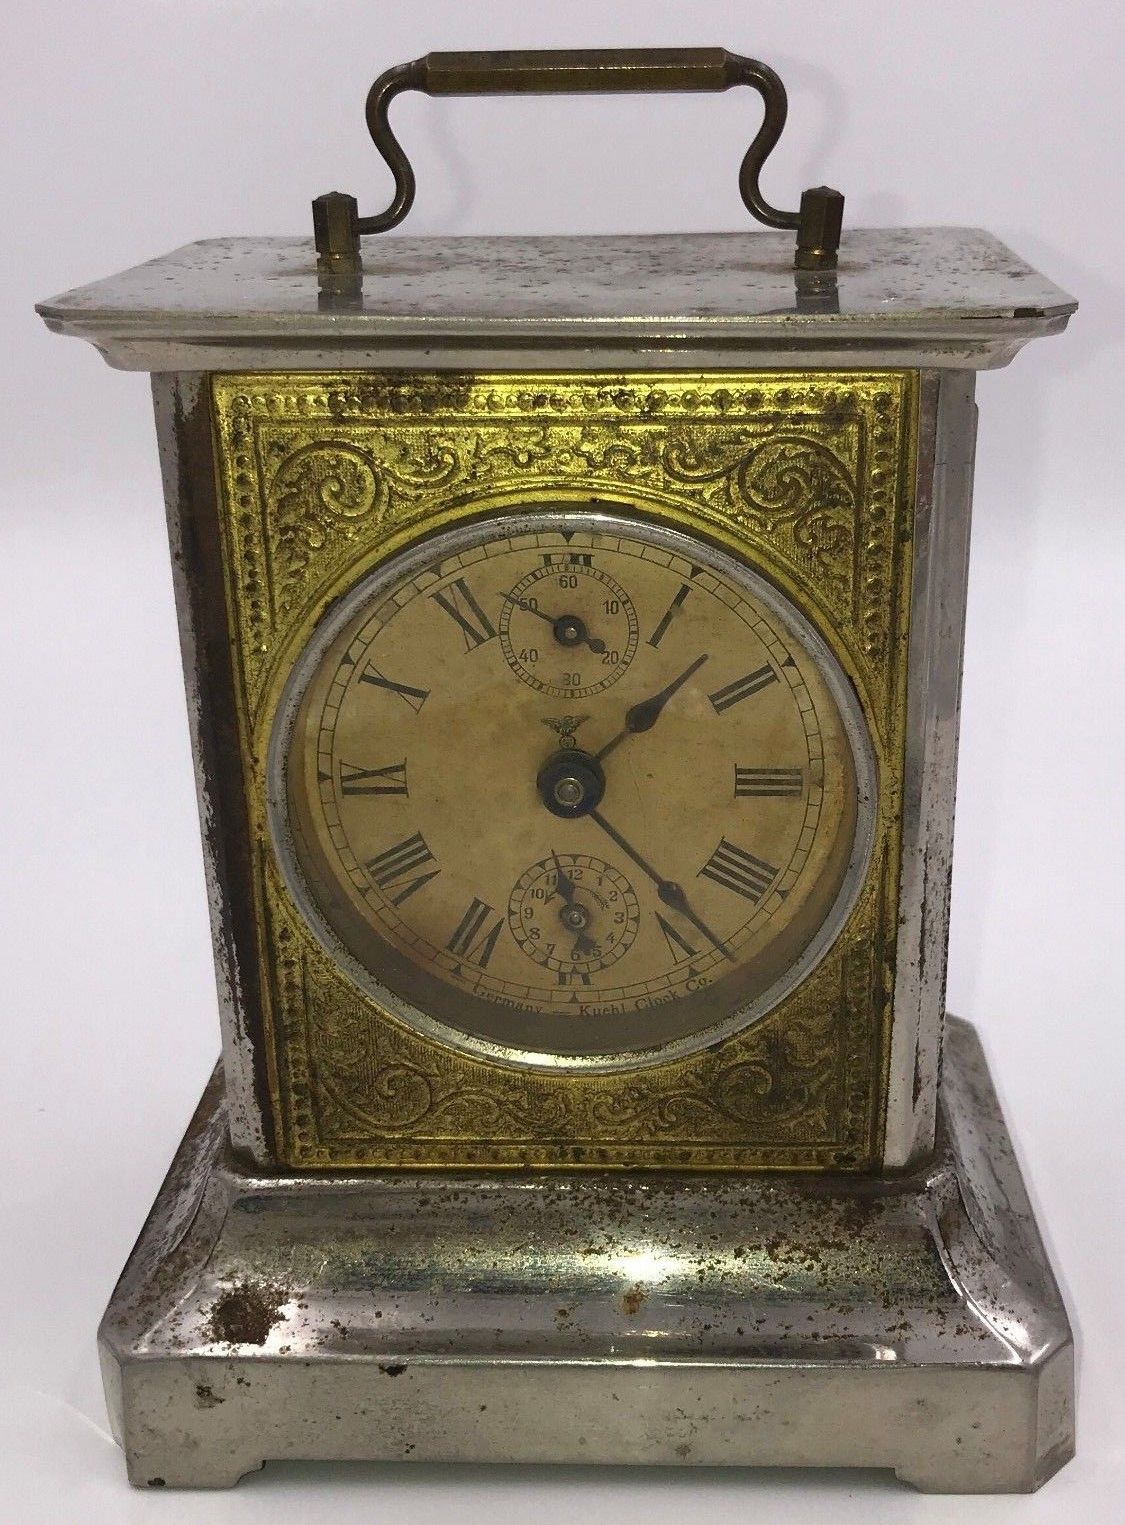 Antique KUEHL CLOCK Wind Up CARRIAGE CLOCK Chimming ALARM Germany ...